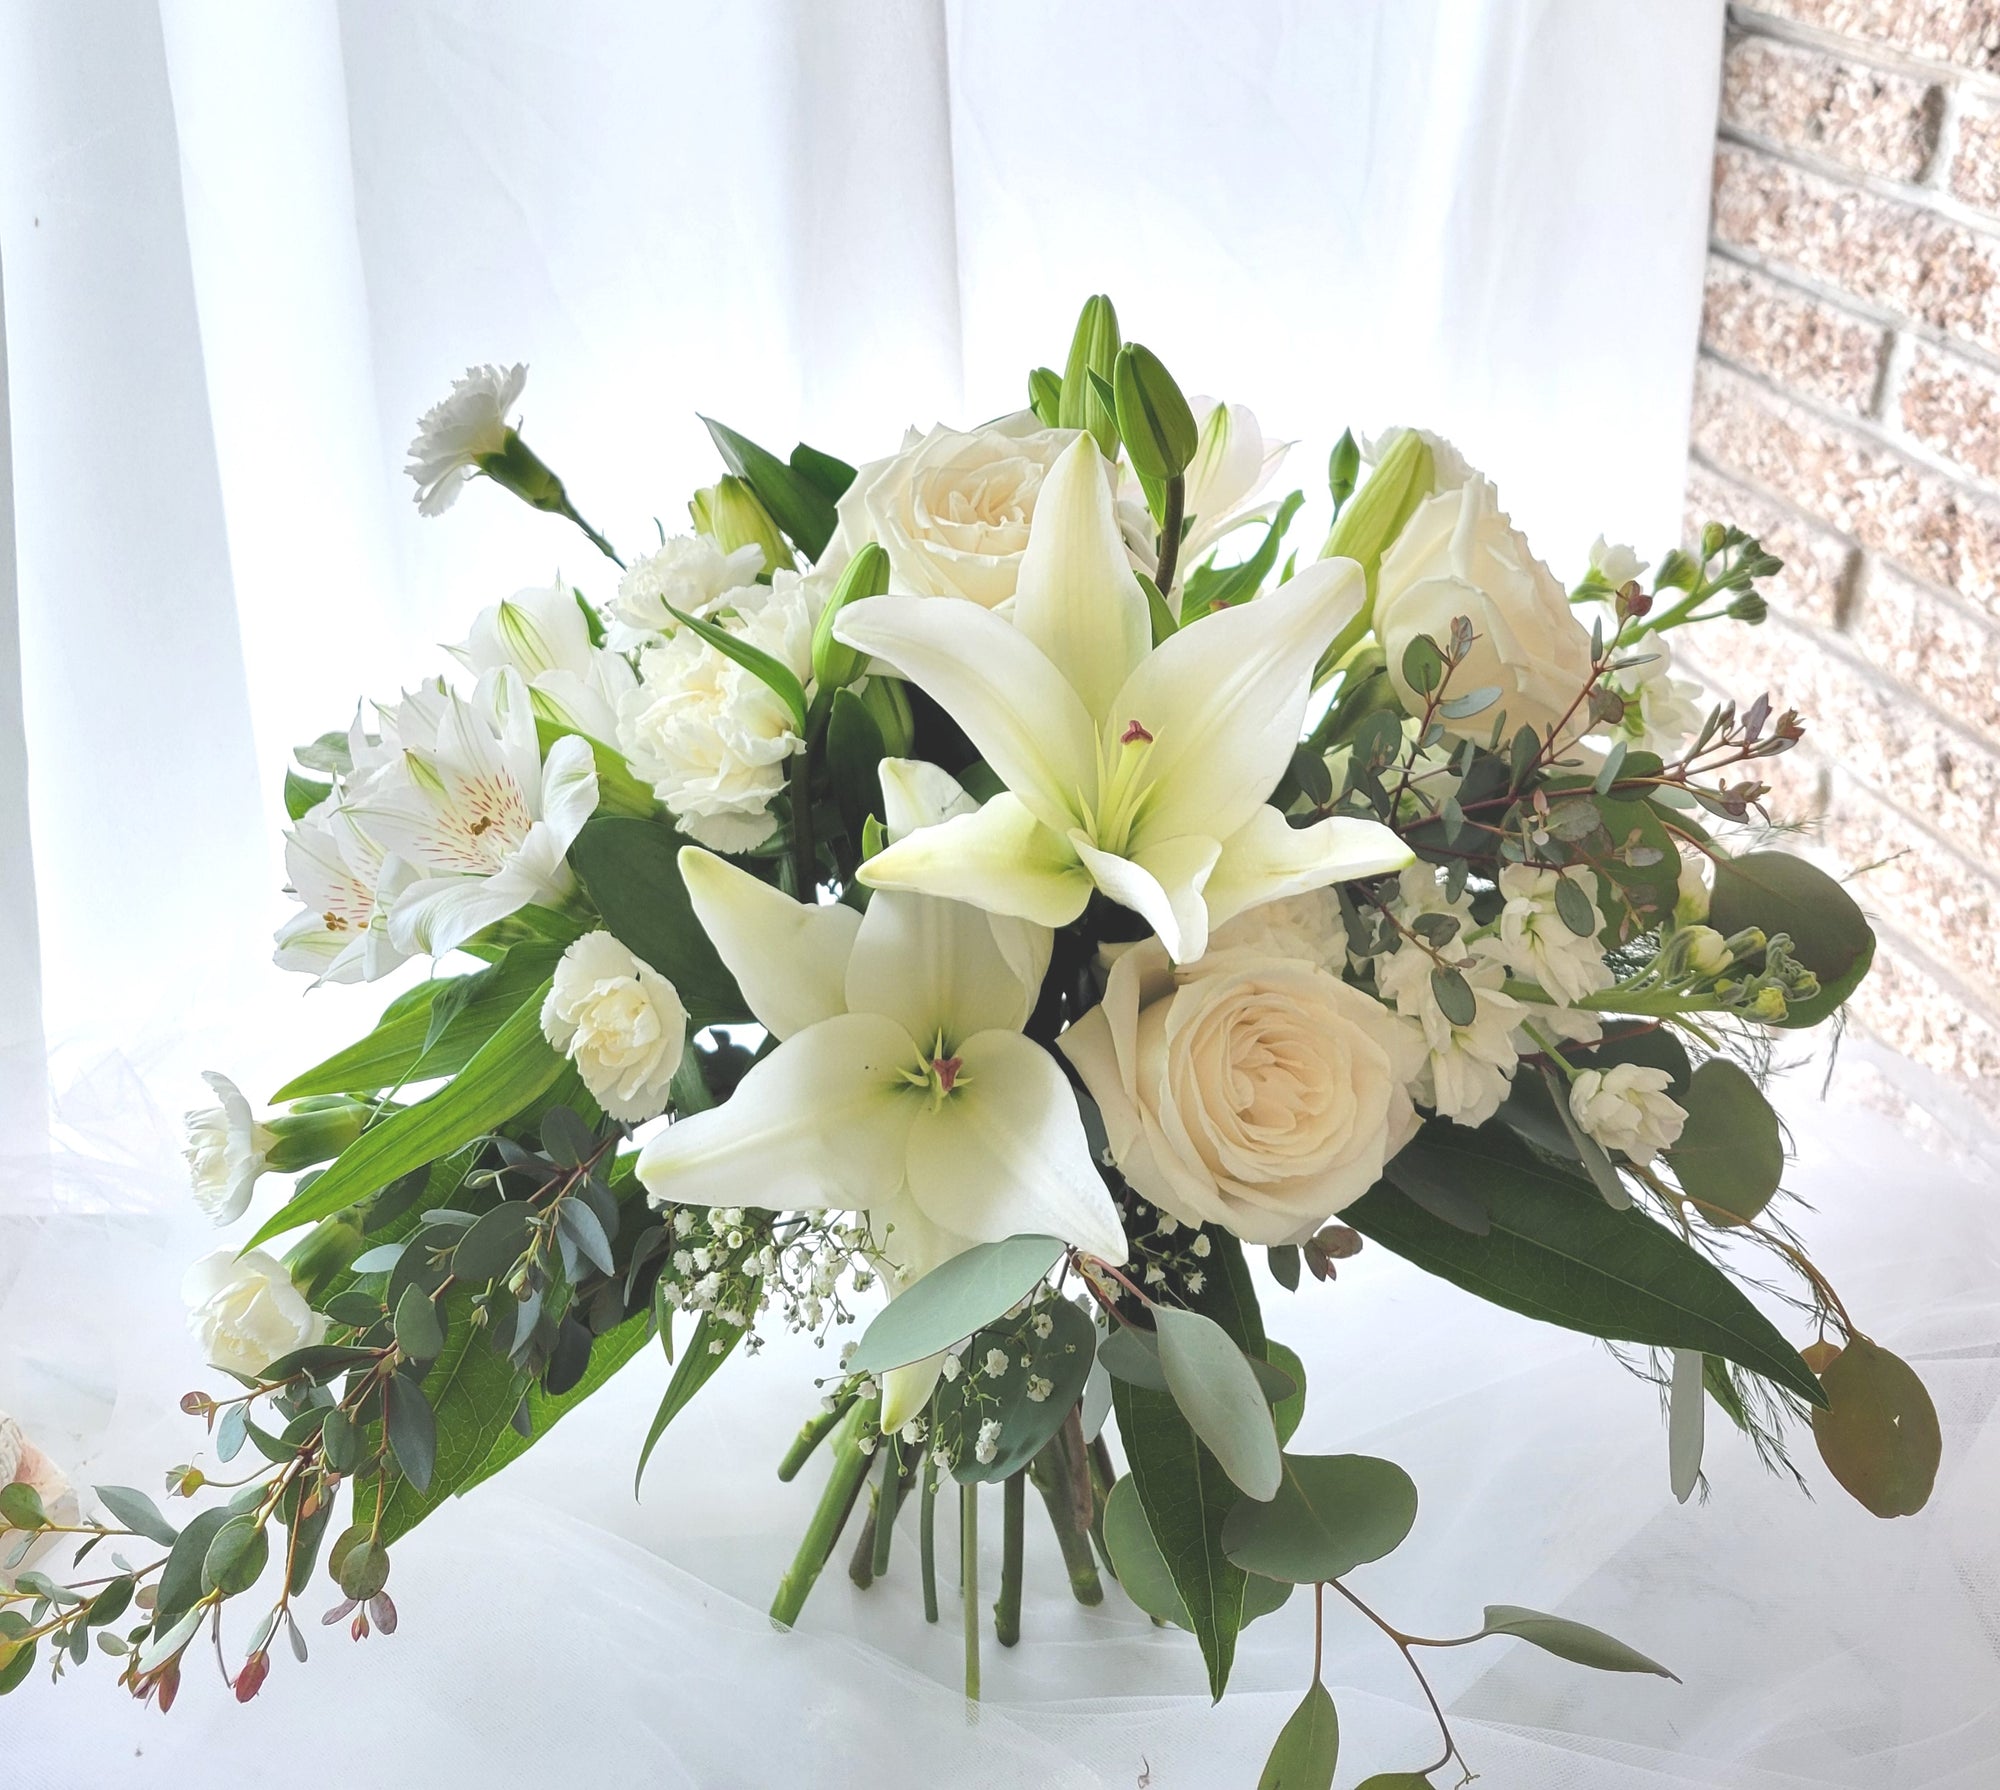 Bridal Bouquet - Loose white garden pave bouquet by Carithers